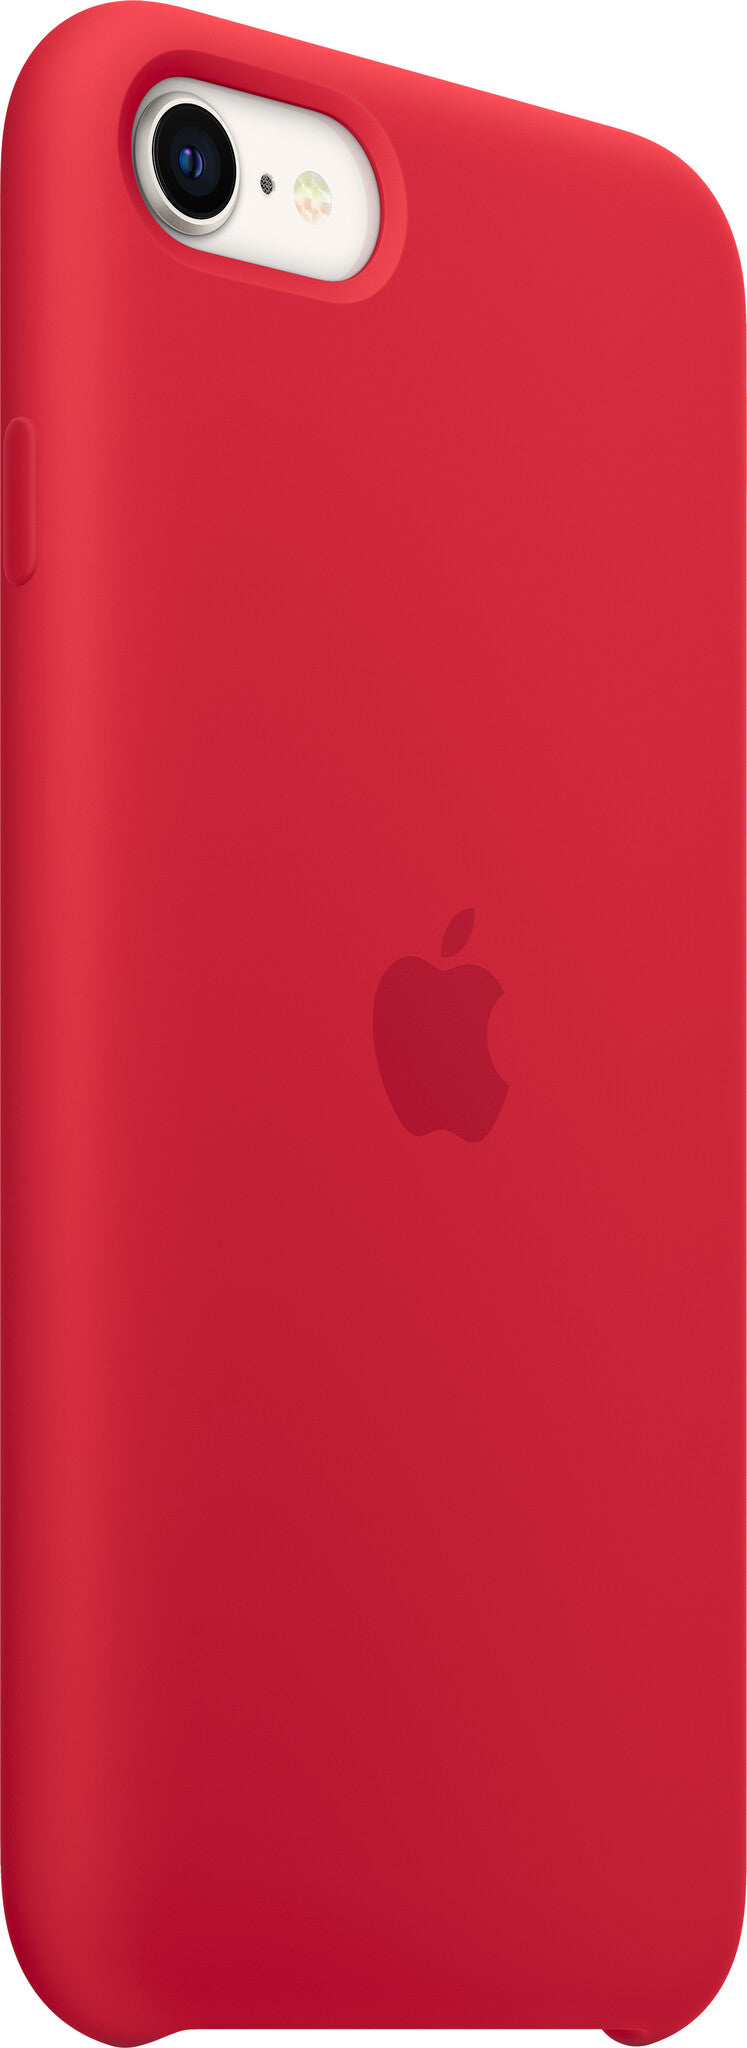 Apple MN6H3ZM/A - Silicone Case for iPhone SE in (PRODUCT)RED